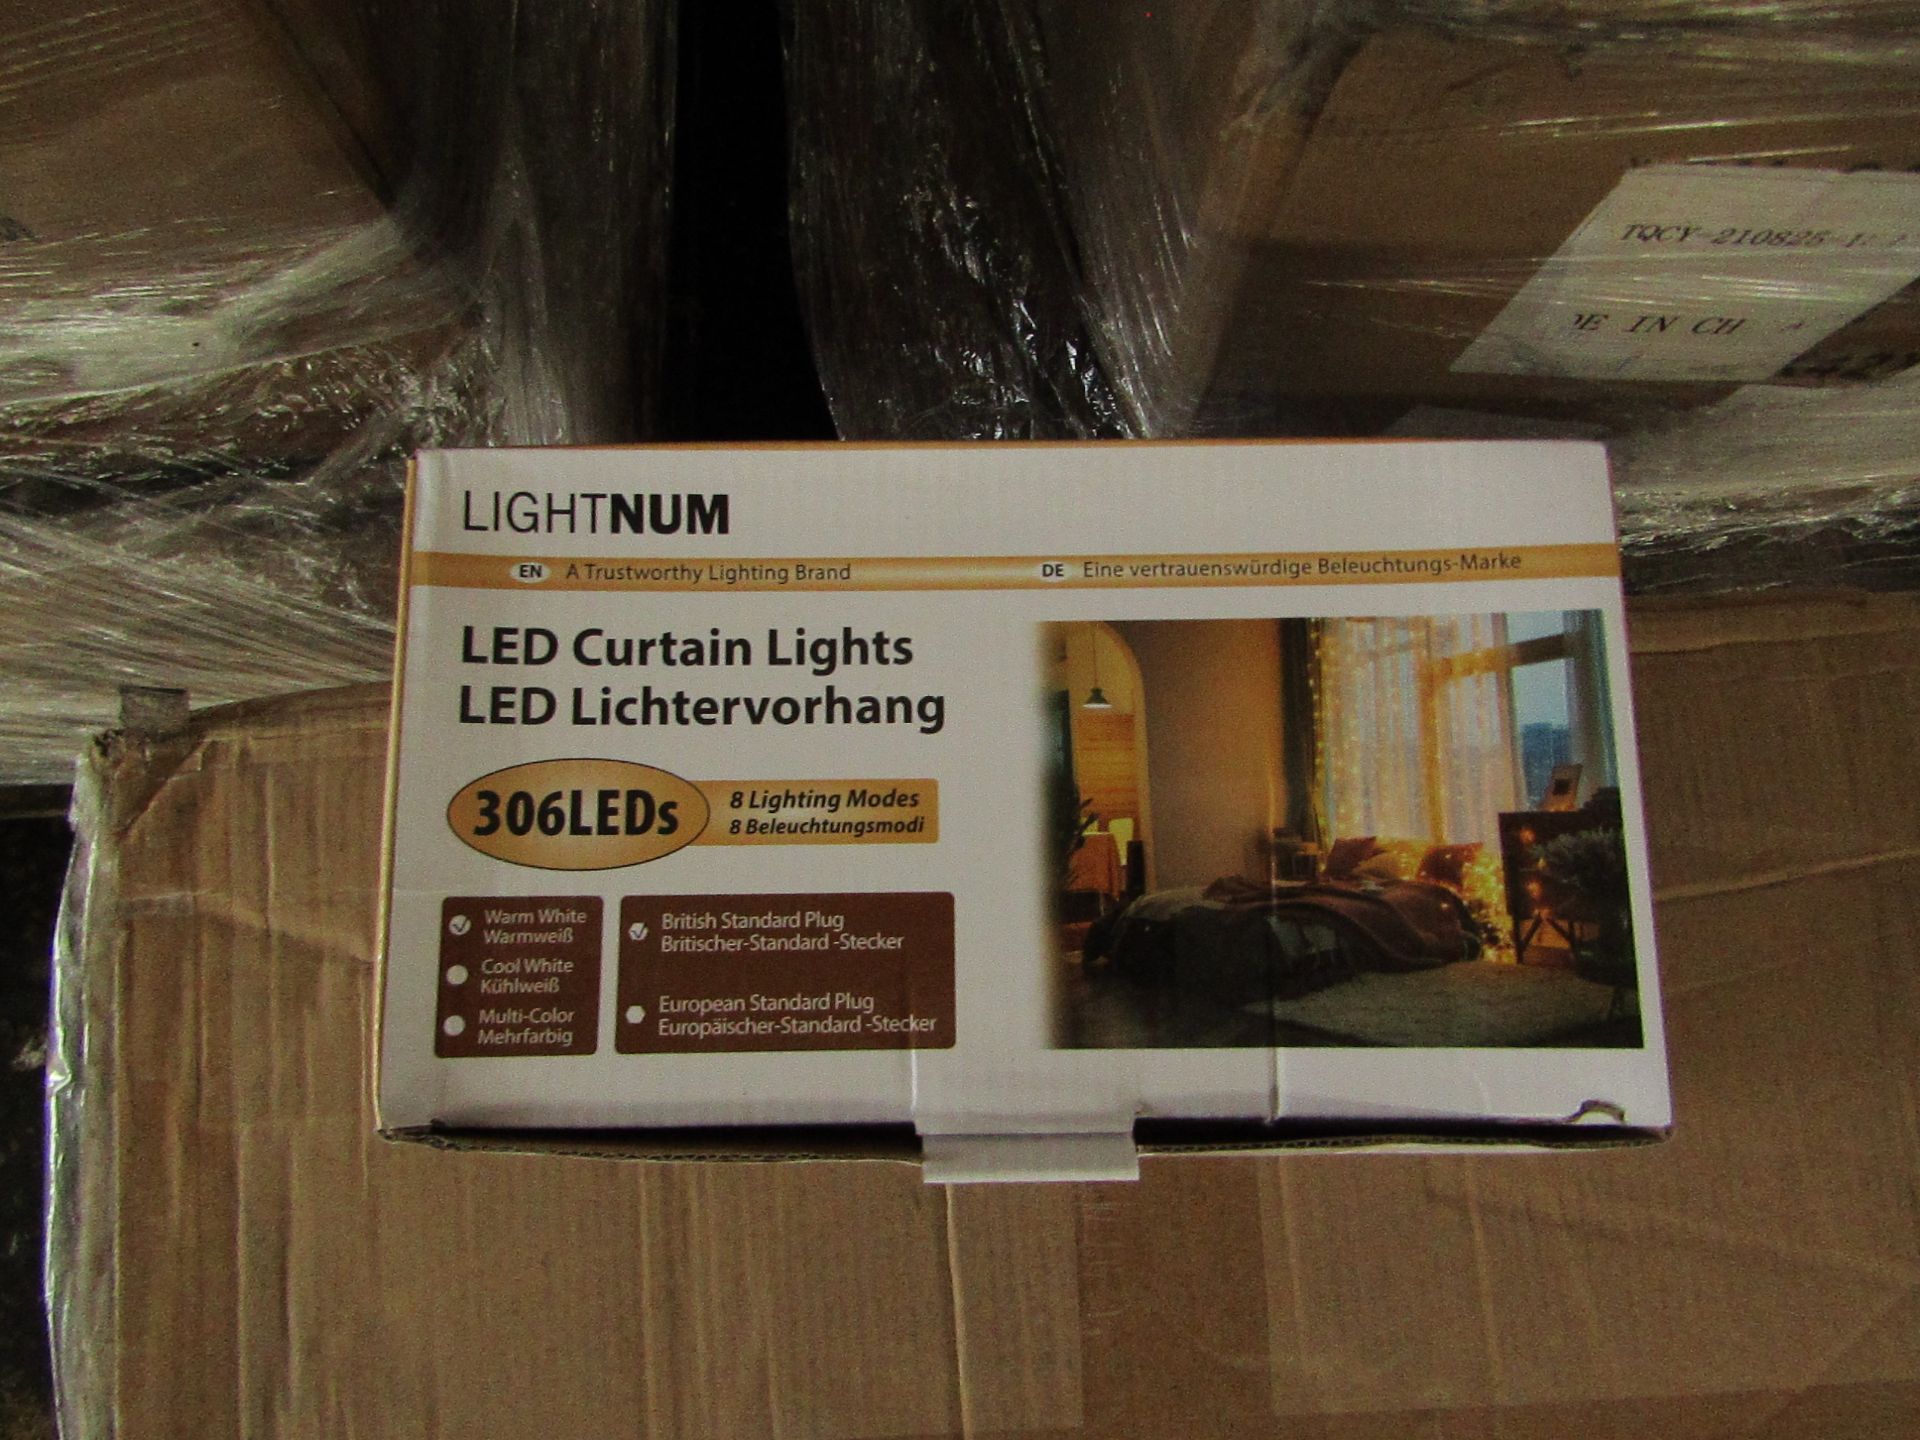 Lightnum LED 3mtr Light curtain with 306 LED and 8 modes, new and boxed.